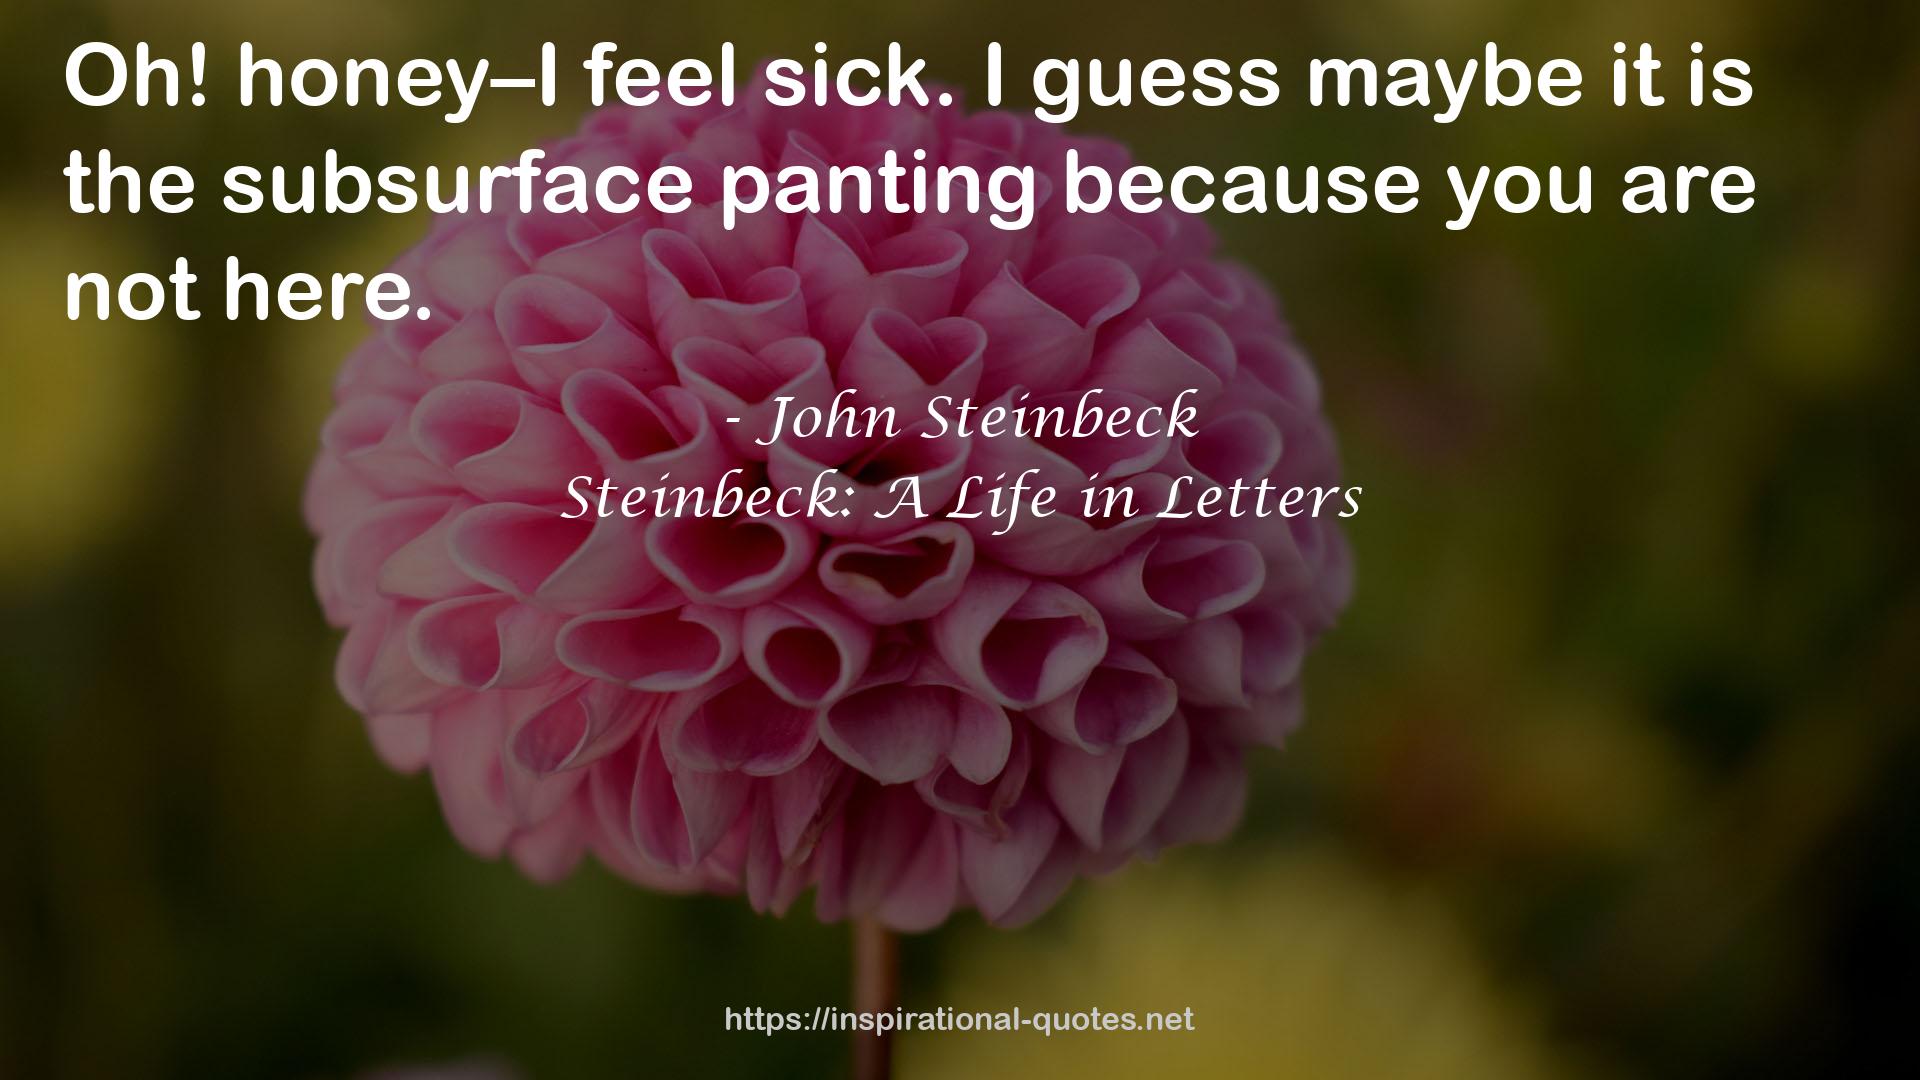 Steinbeck: A Life in Letters QUOTES